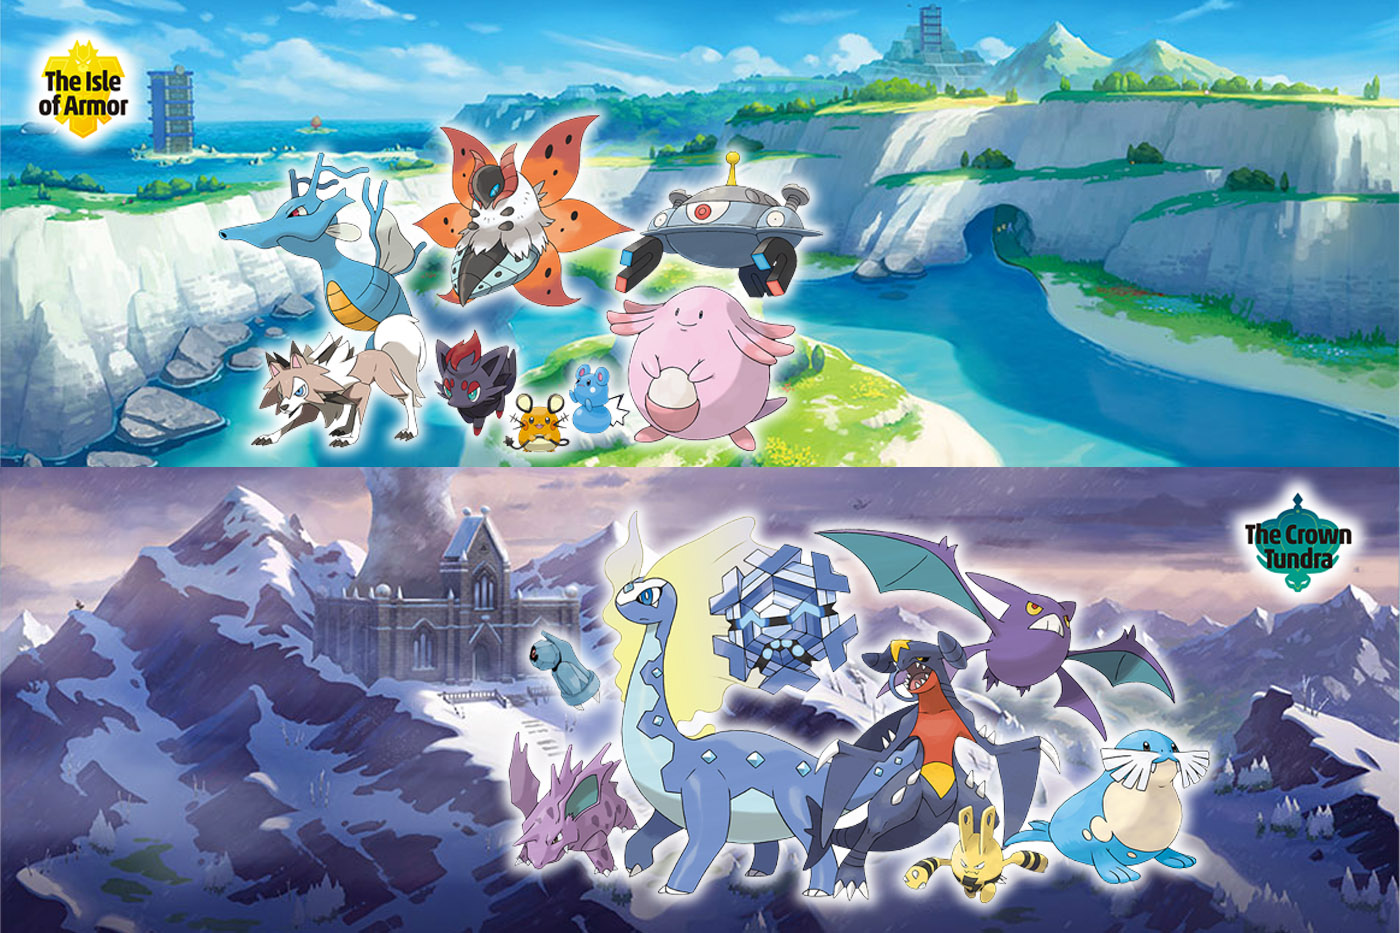 Pokemon Sword and Shield DLC - Don't buy expansion pass from